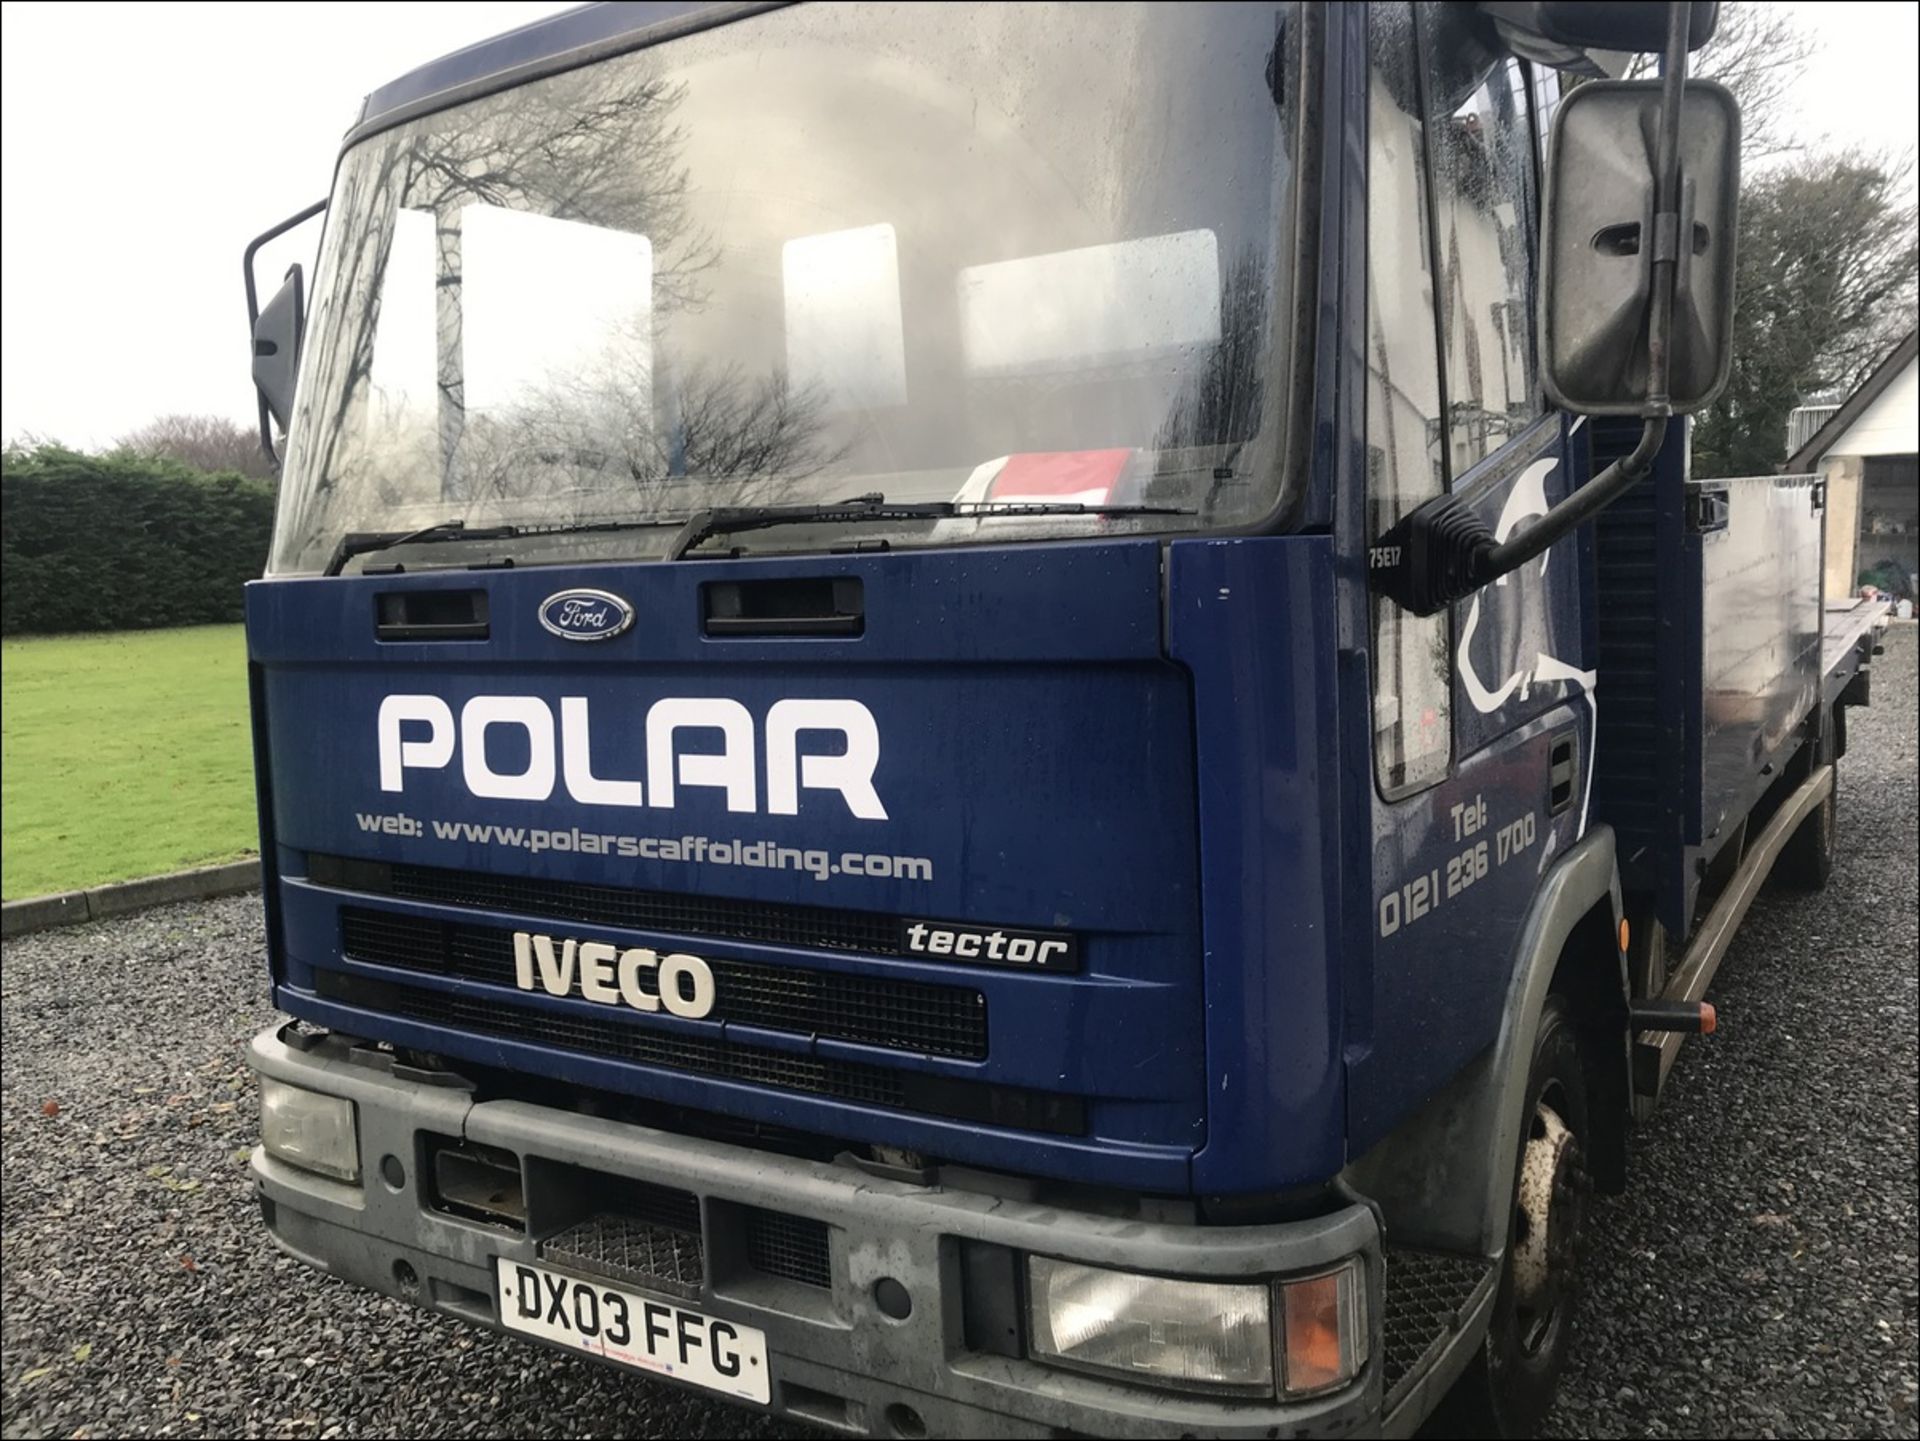 03/03 IVECO-FORD CARGO TECTOR - 3920cc 2dr Dropside (Blue, 271k) - Image 3 of 5